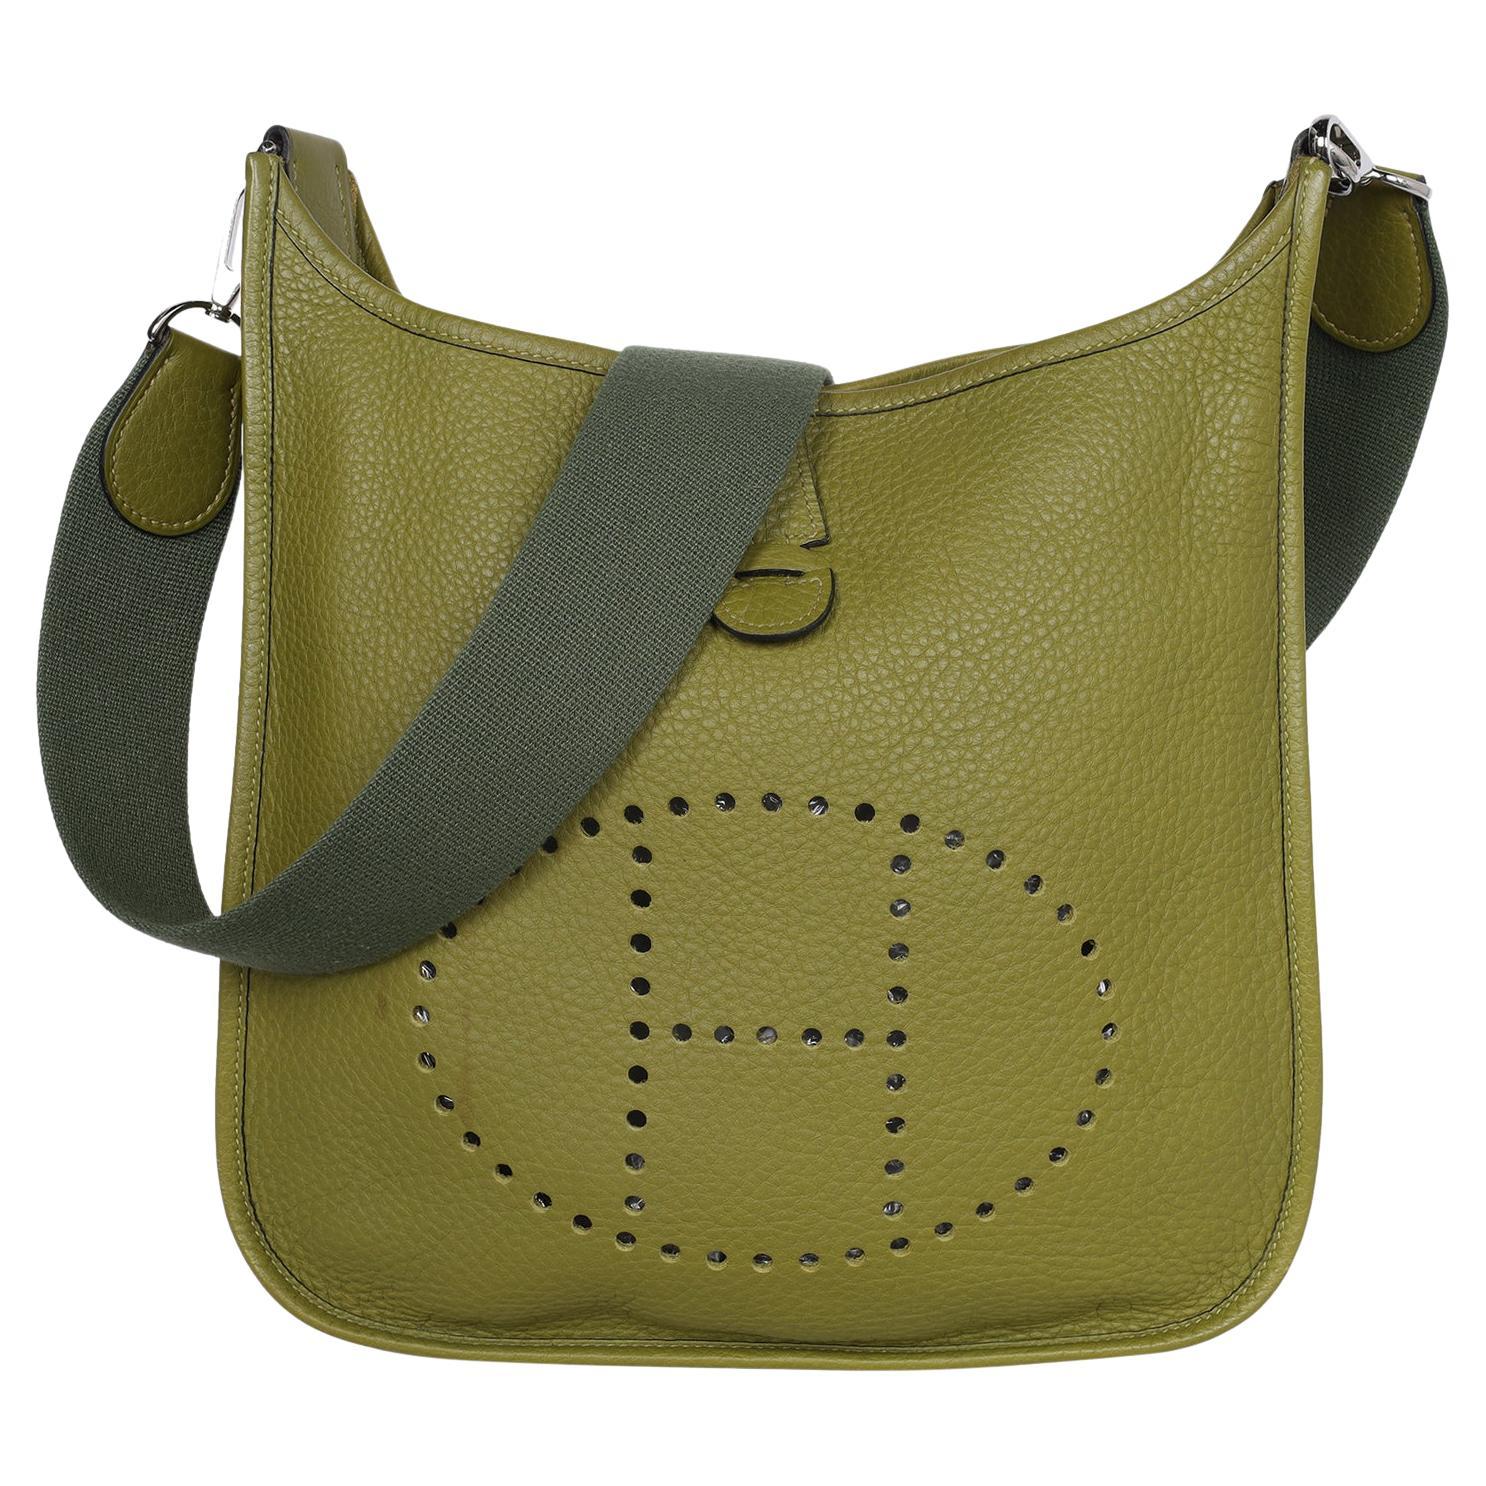 Authentic, pre-loved Hermes Green Leather Evelyne II Shoulder Bag.

Features a perforated logo display on the front, and a flat shoulder strap, the bag can be worn comfortably over the shoulder. The upper opening is secured with the help of a snap